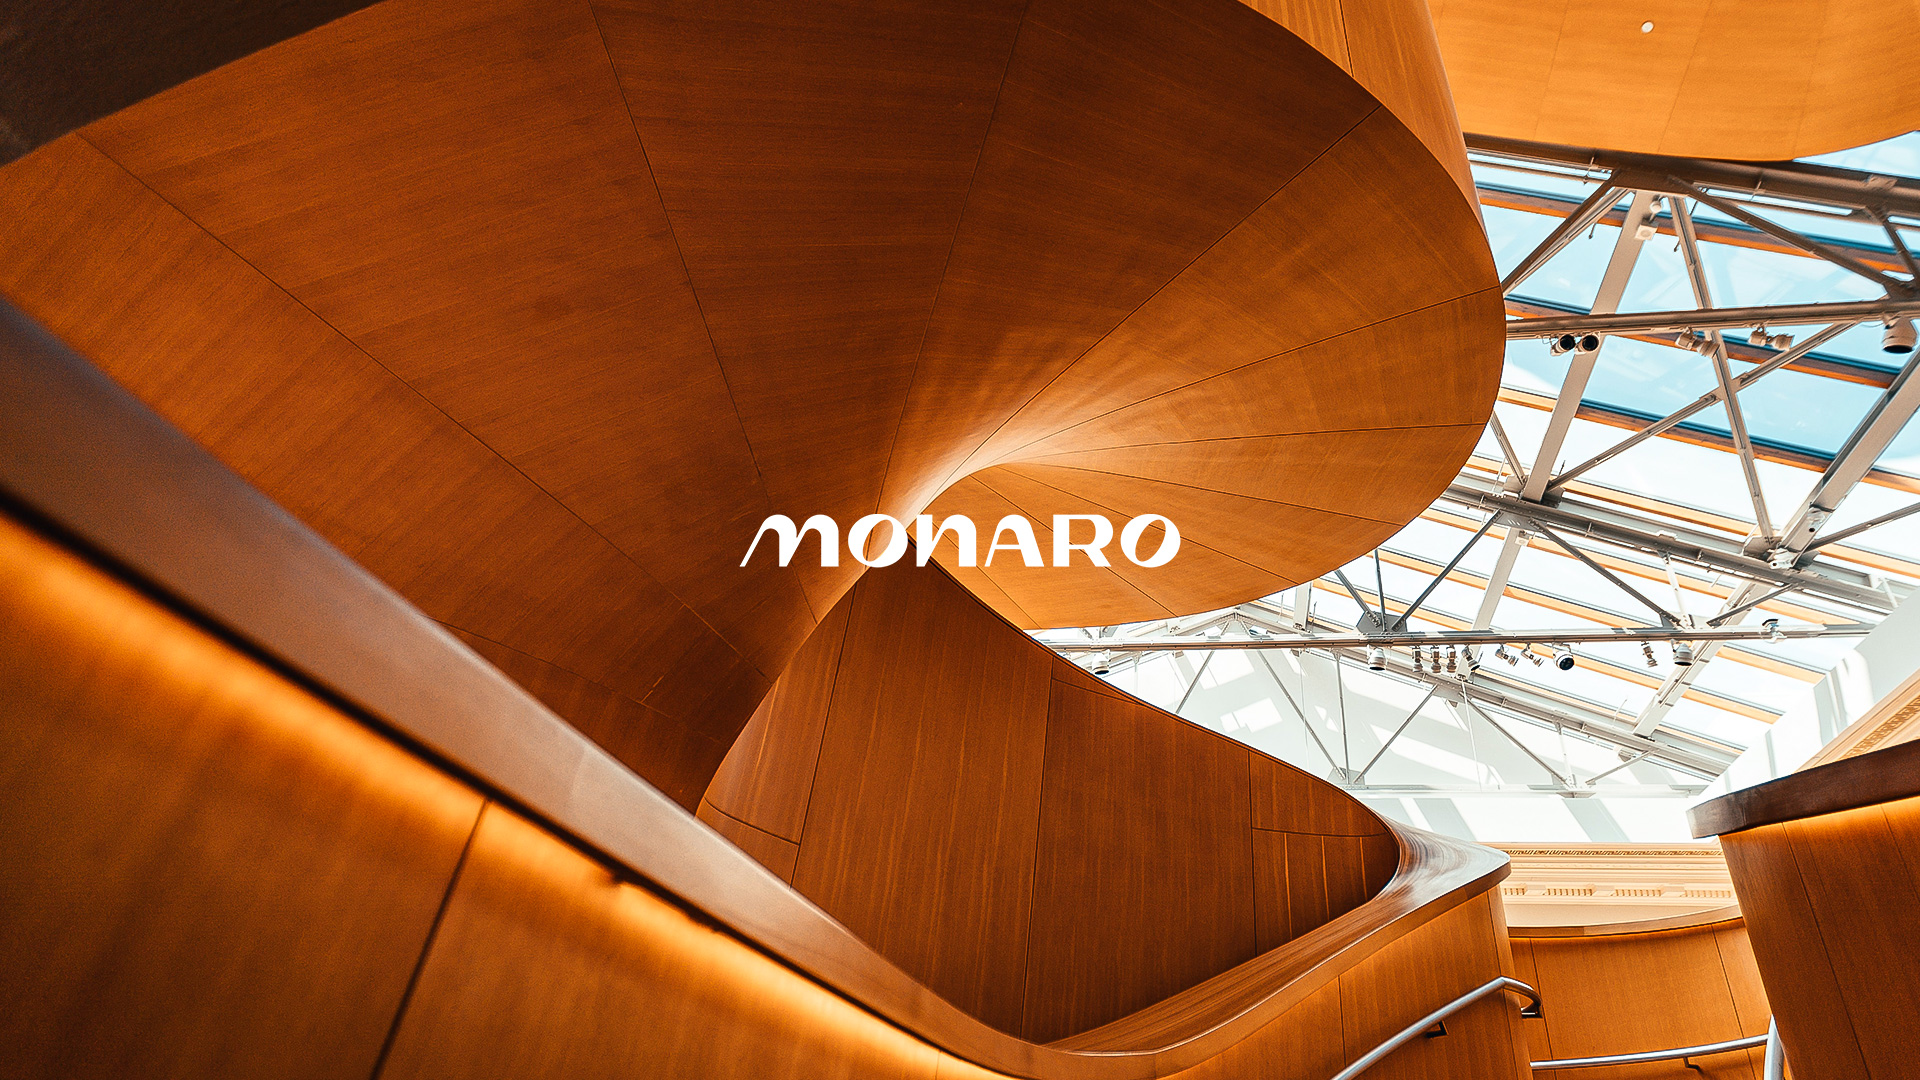 Naming and Visual Identity For Monaro By Caio Costa